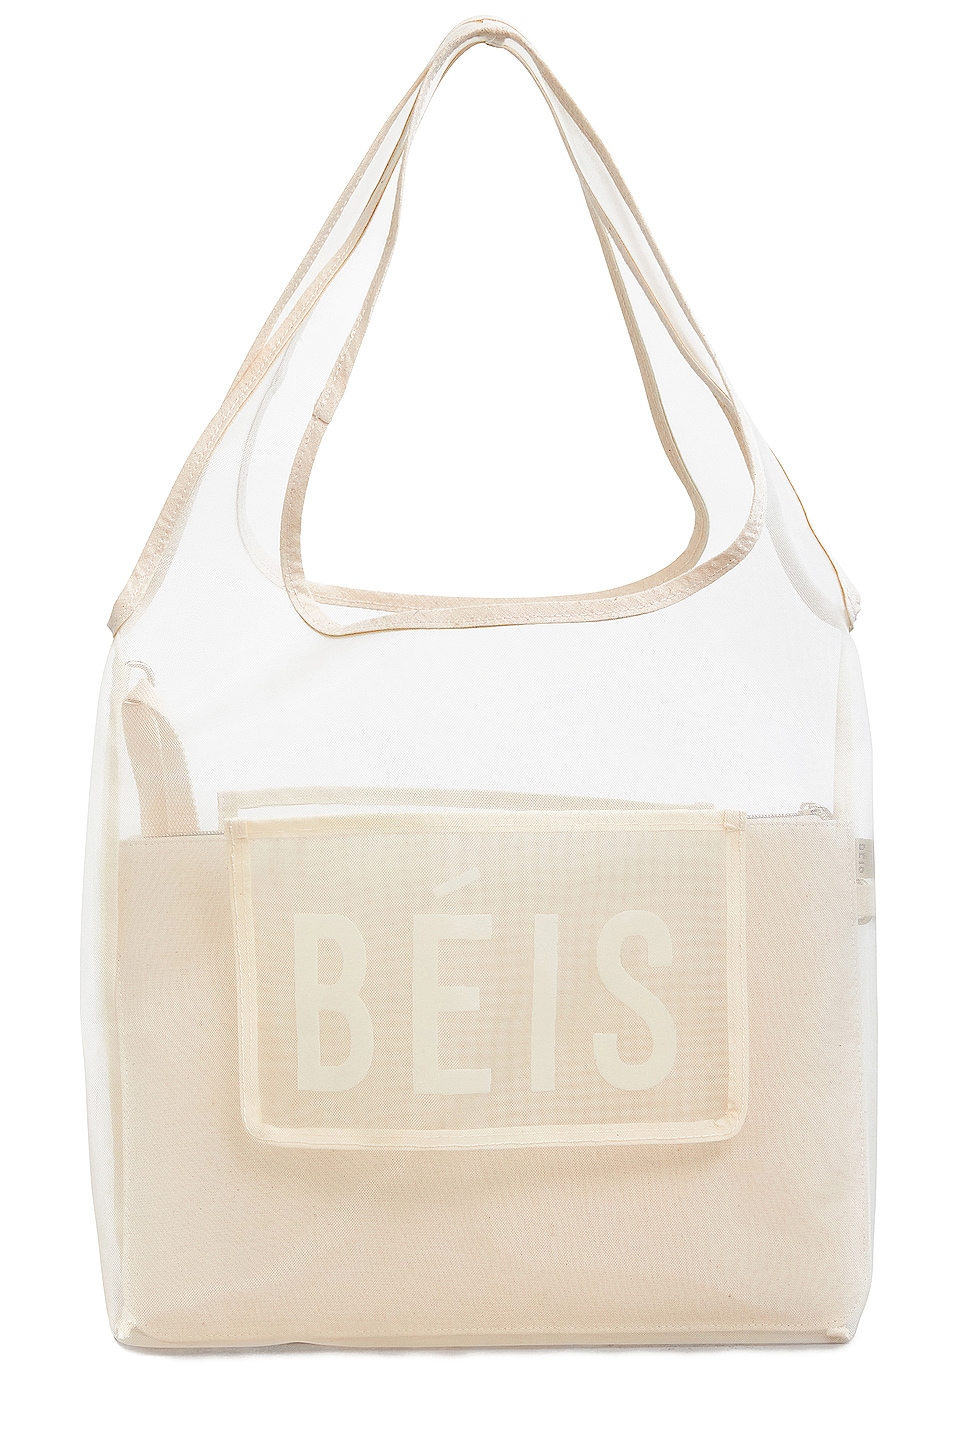 BEIS The Toke Tote in Beige | REVOLVE